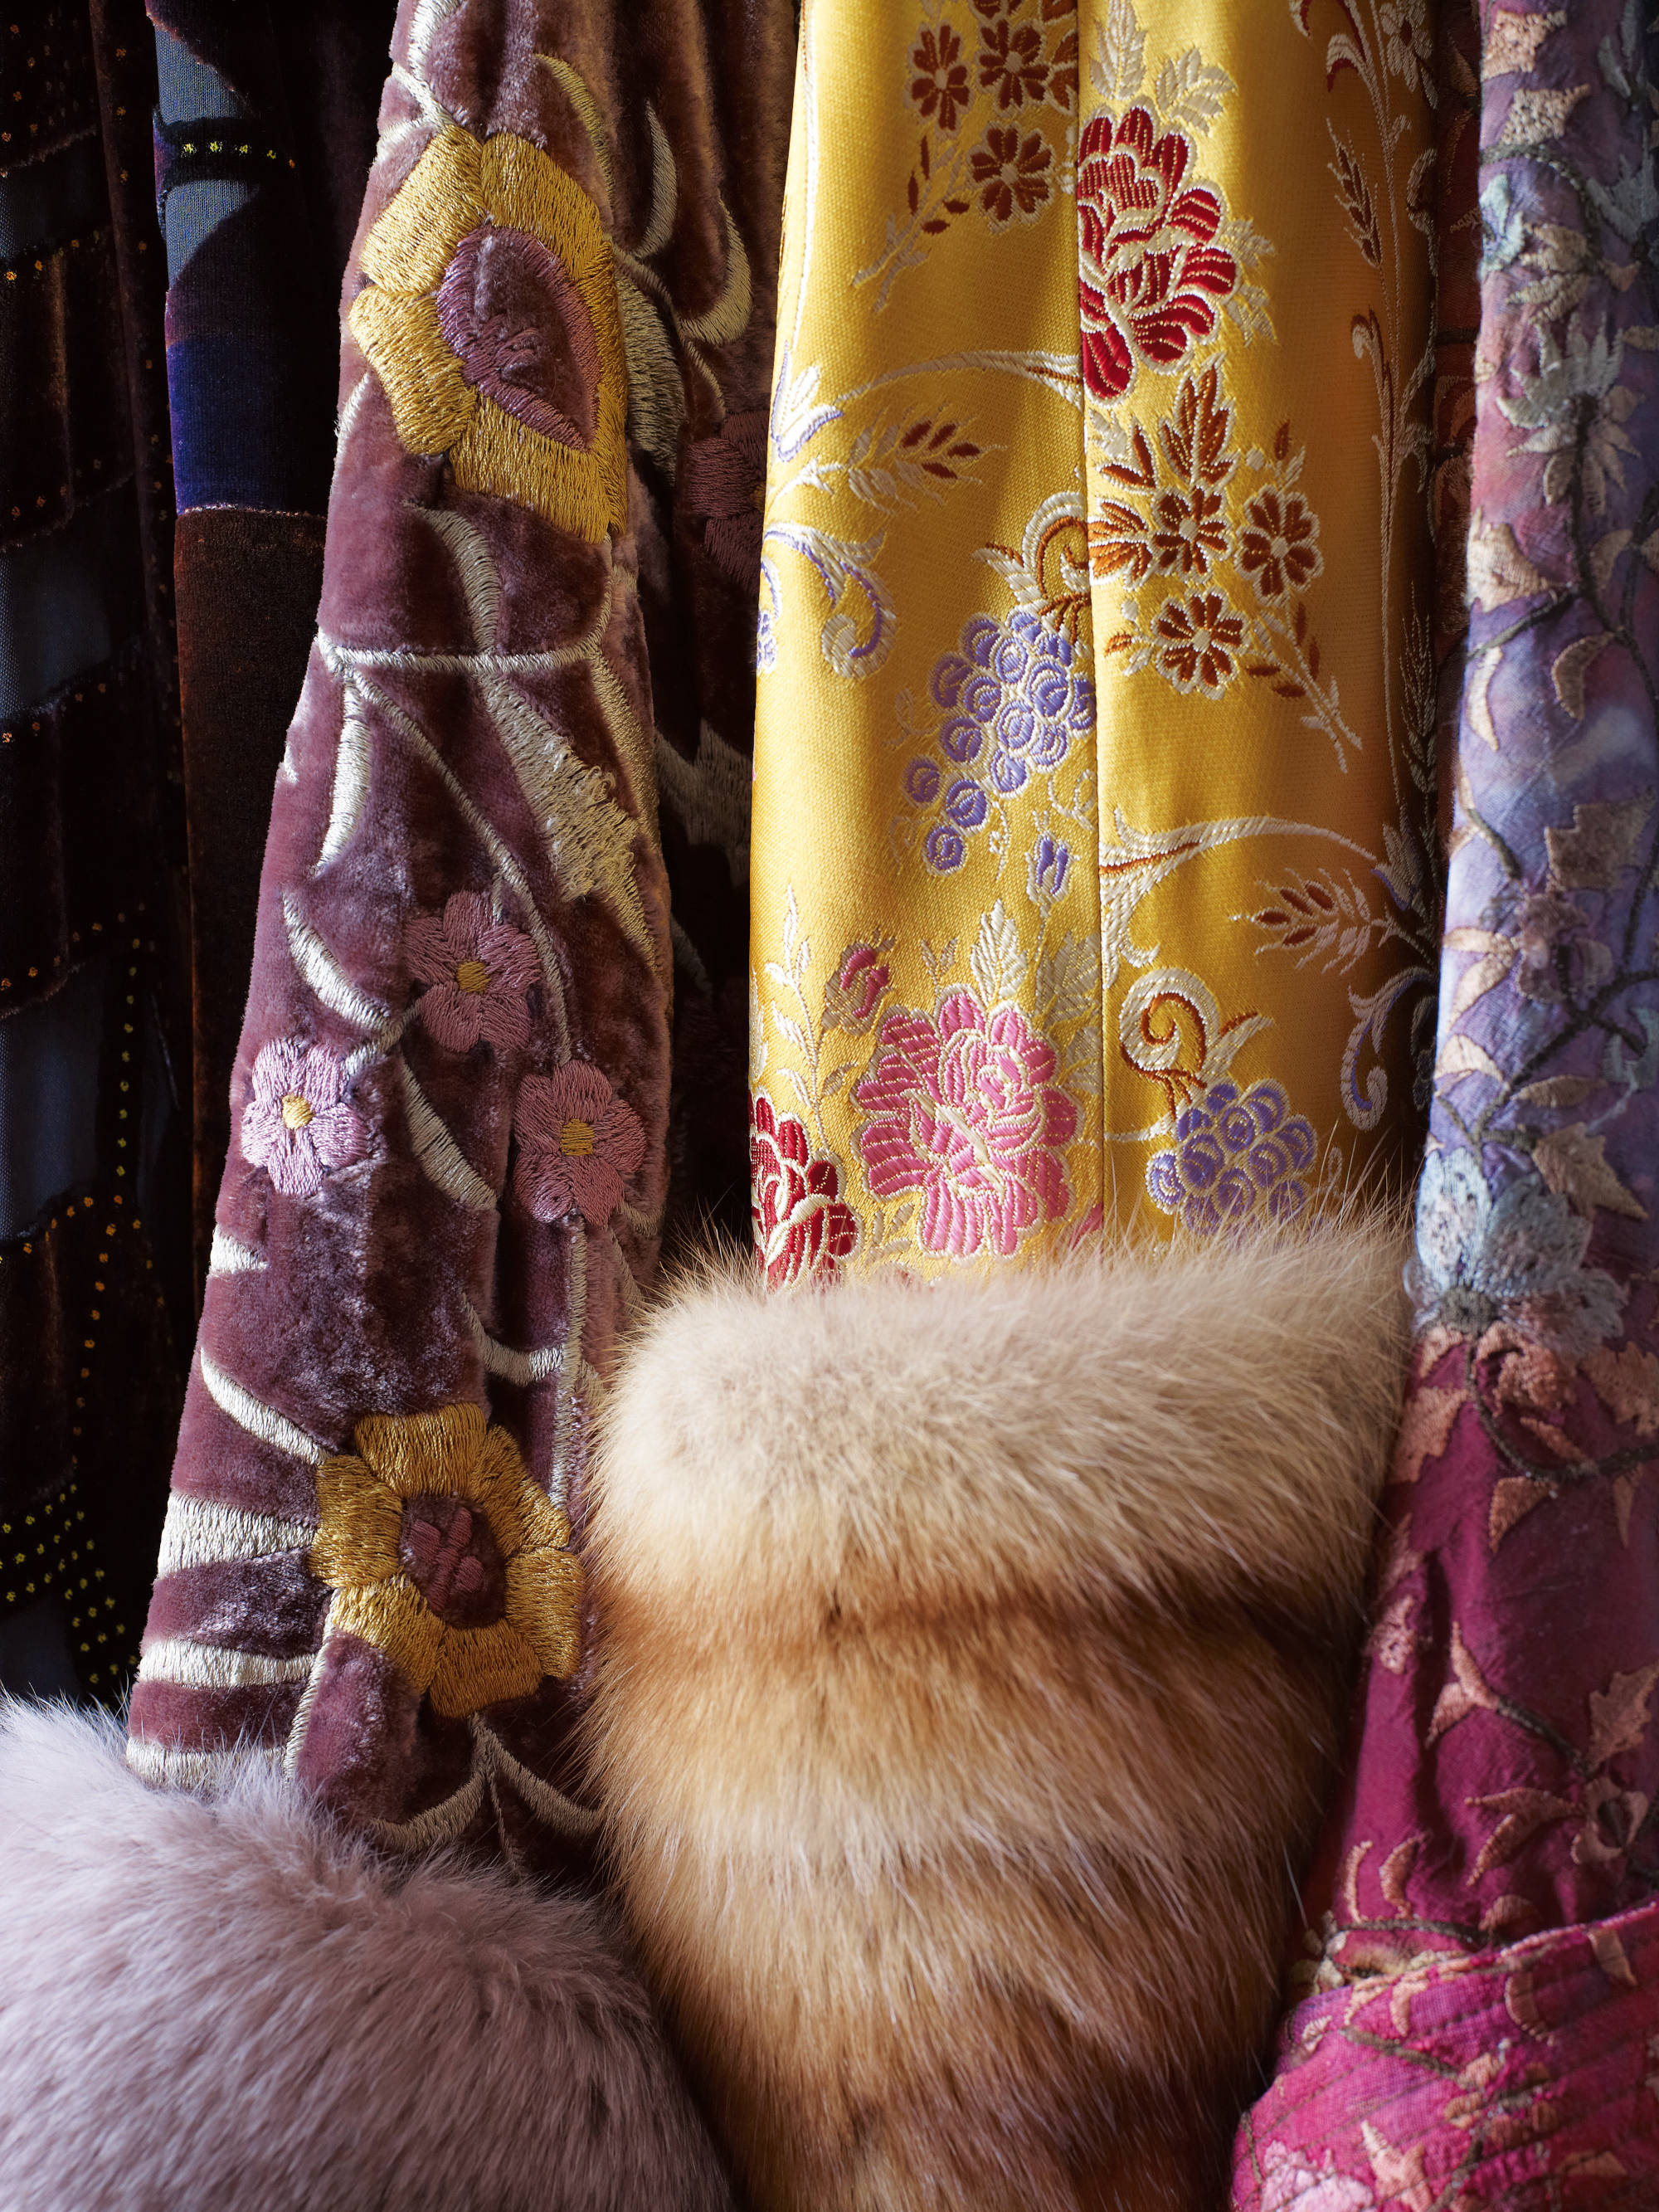 Untitled #1 (Elizabeth Taylor’s Closet), 2012. Pigment print, 40 × 30 in. (101.6 × 76.2 cm). Picture credit: courtesy the artist and Regen Projects, Los Angeles; Lehmann Maupin, New York/Hong Kong/Seoul/London; Thomas Dane Gallery, London and Naples; and Peder Lund, Oslo 